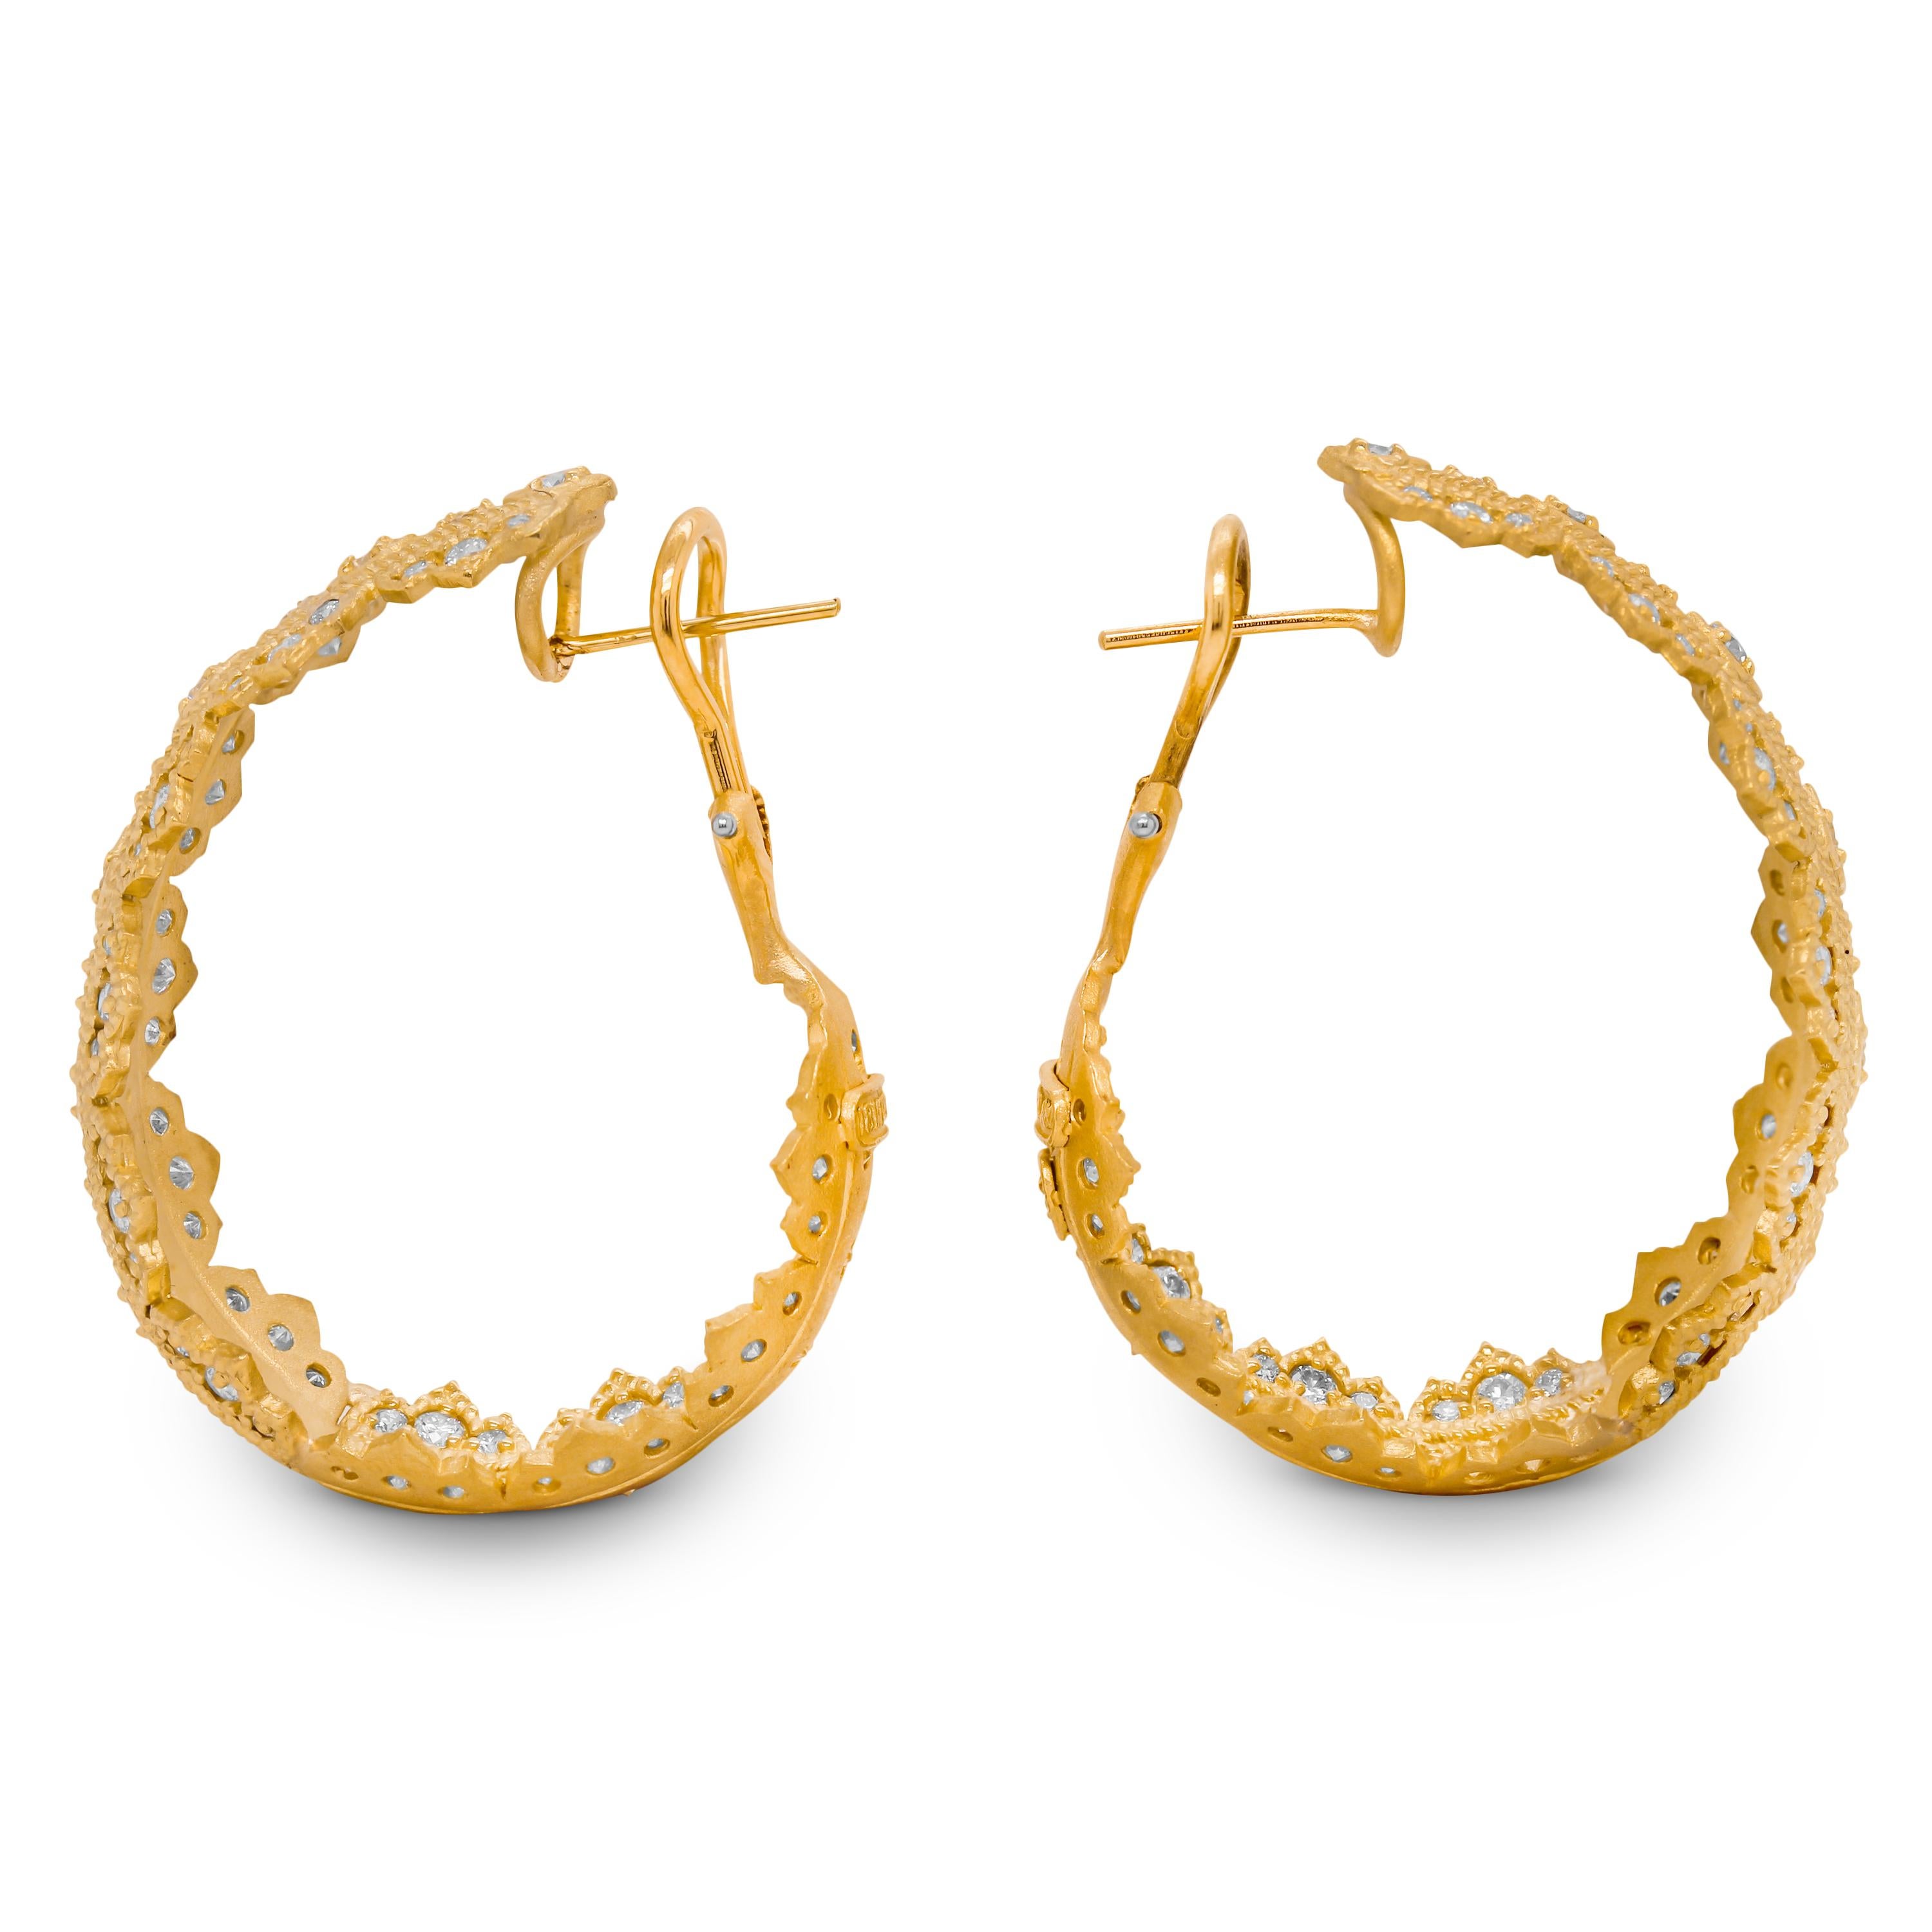 Stambolian 18K Gold Diamond Passion Collection Inside-Out Large Hoop Earrings

From the Stambolian 